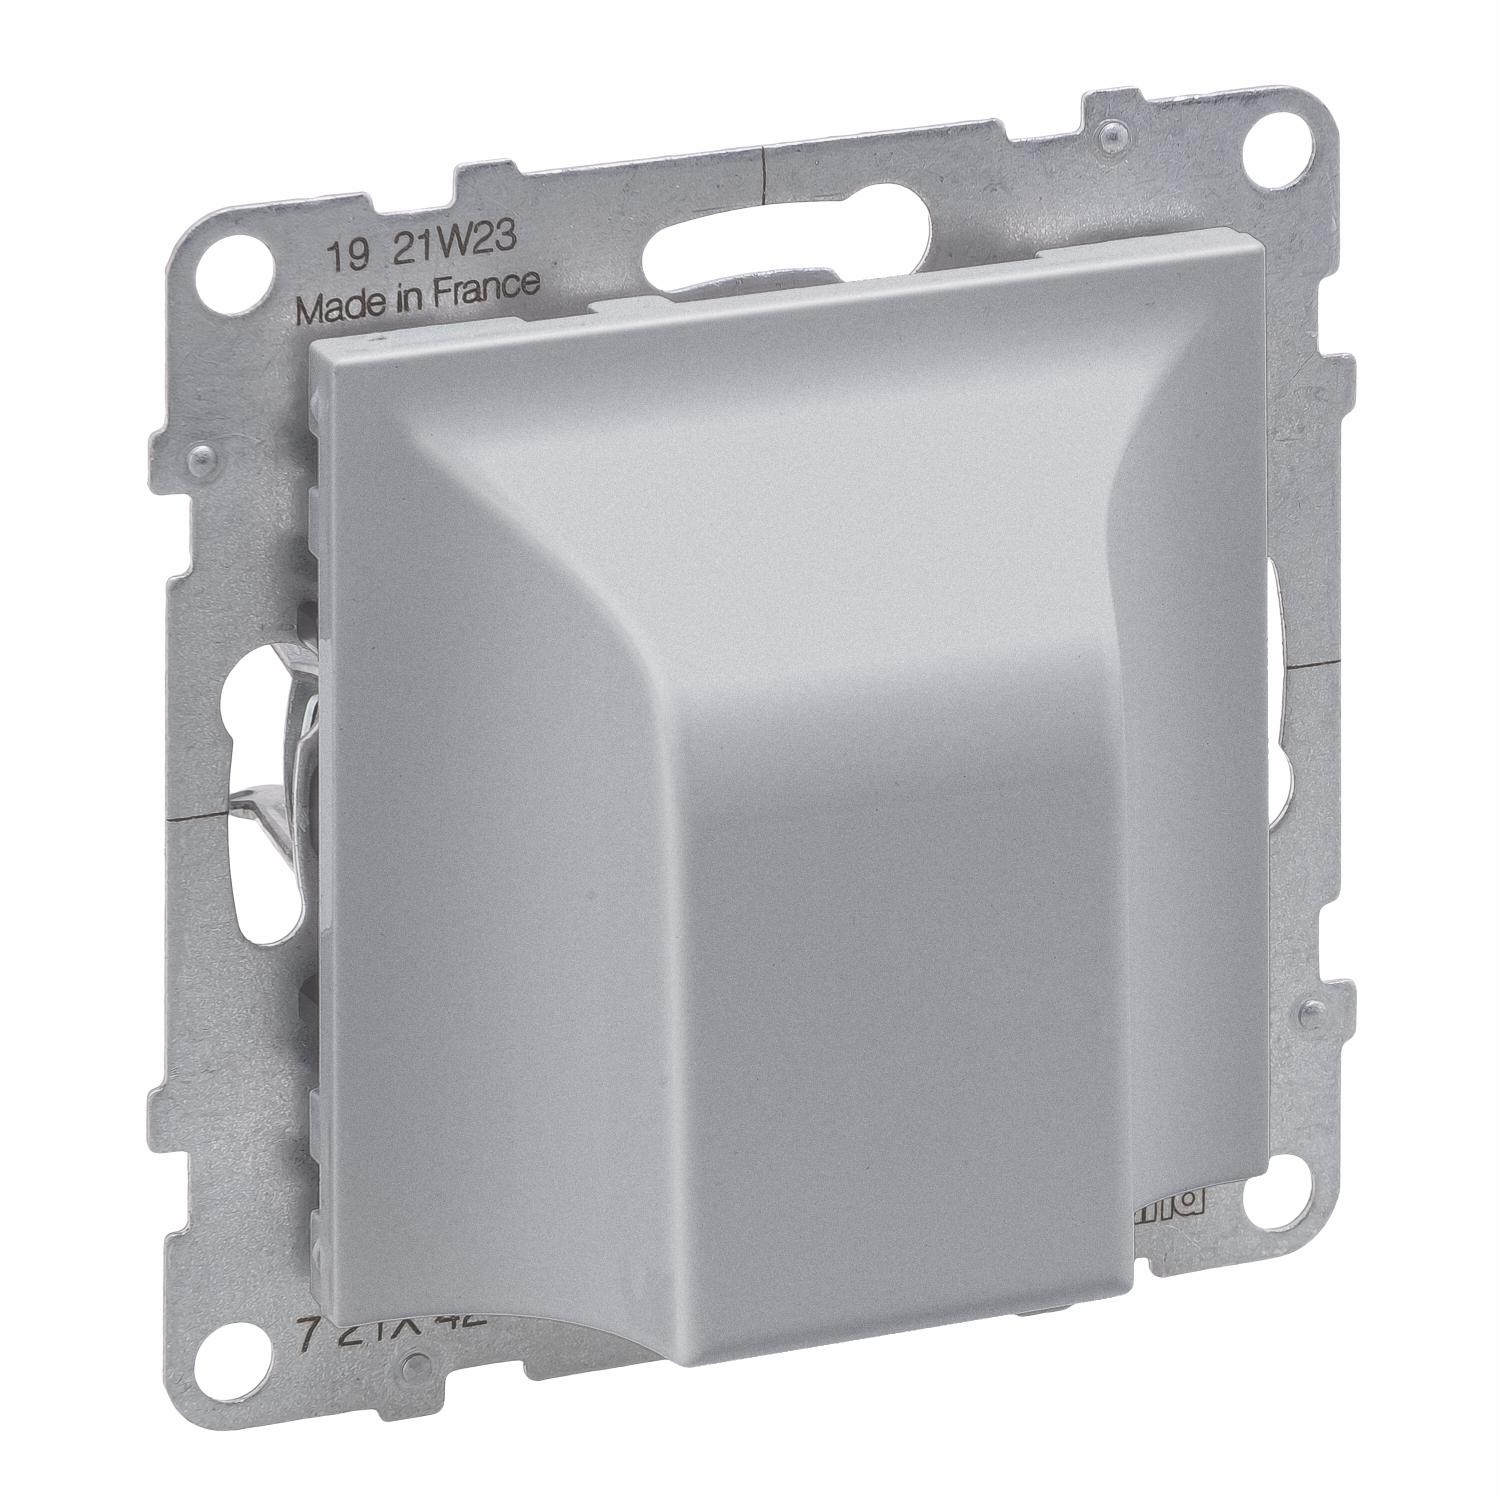 CABLE OUTLET  IP21  ALUMINIUM